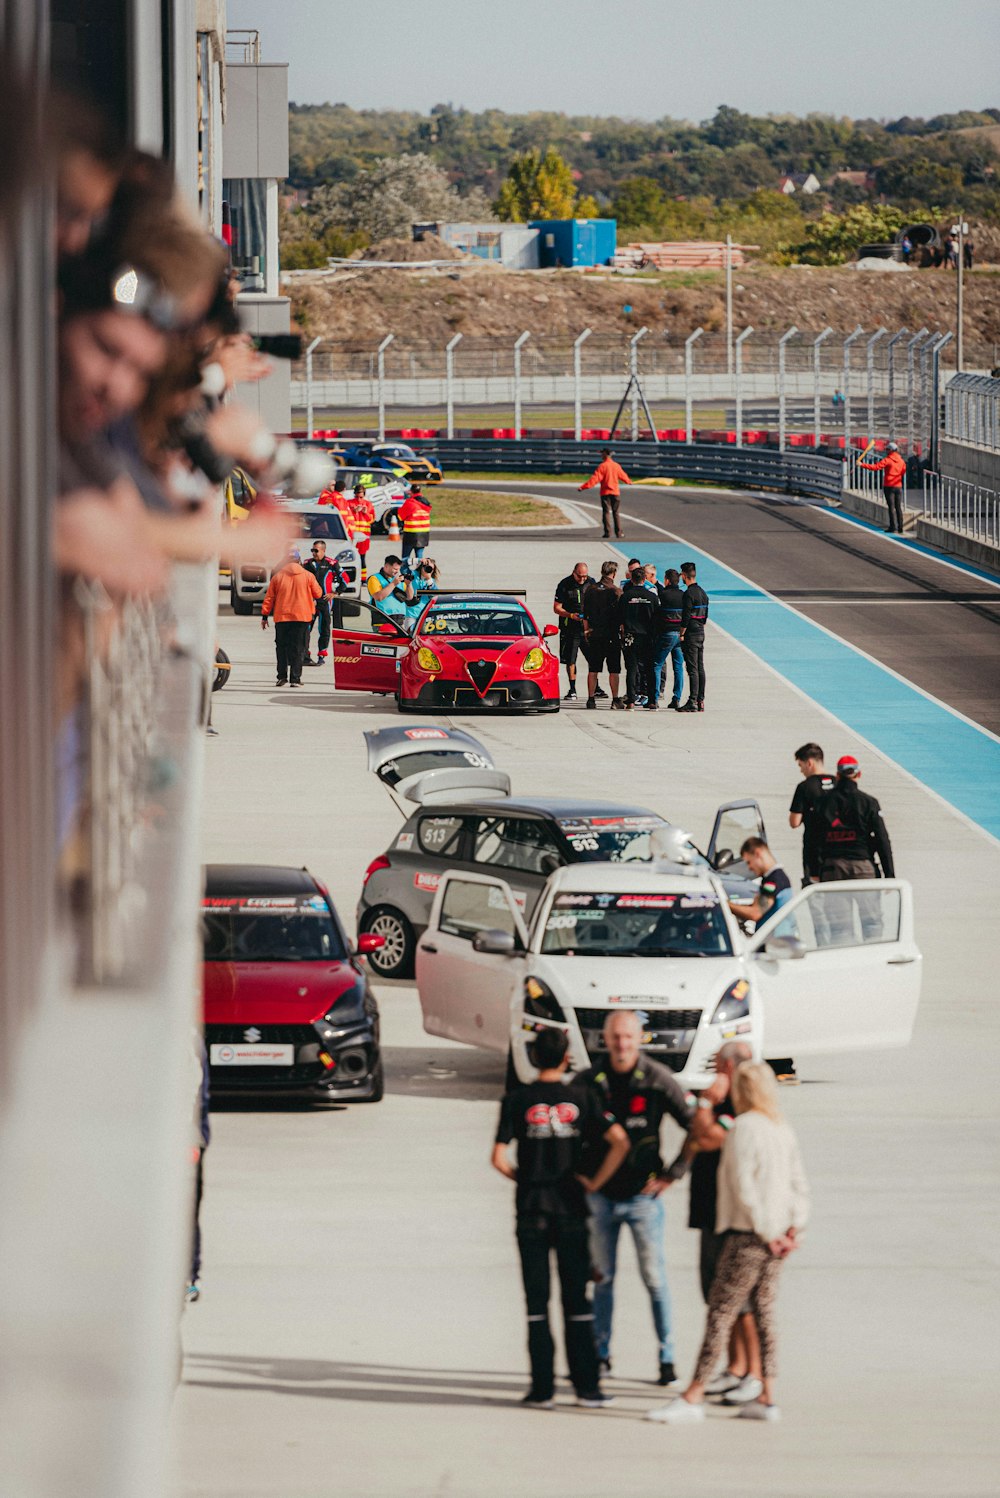 a group of people standing on a race track